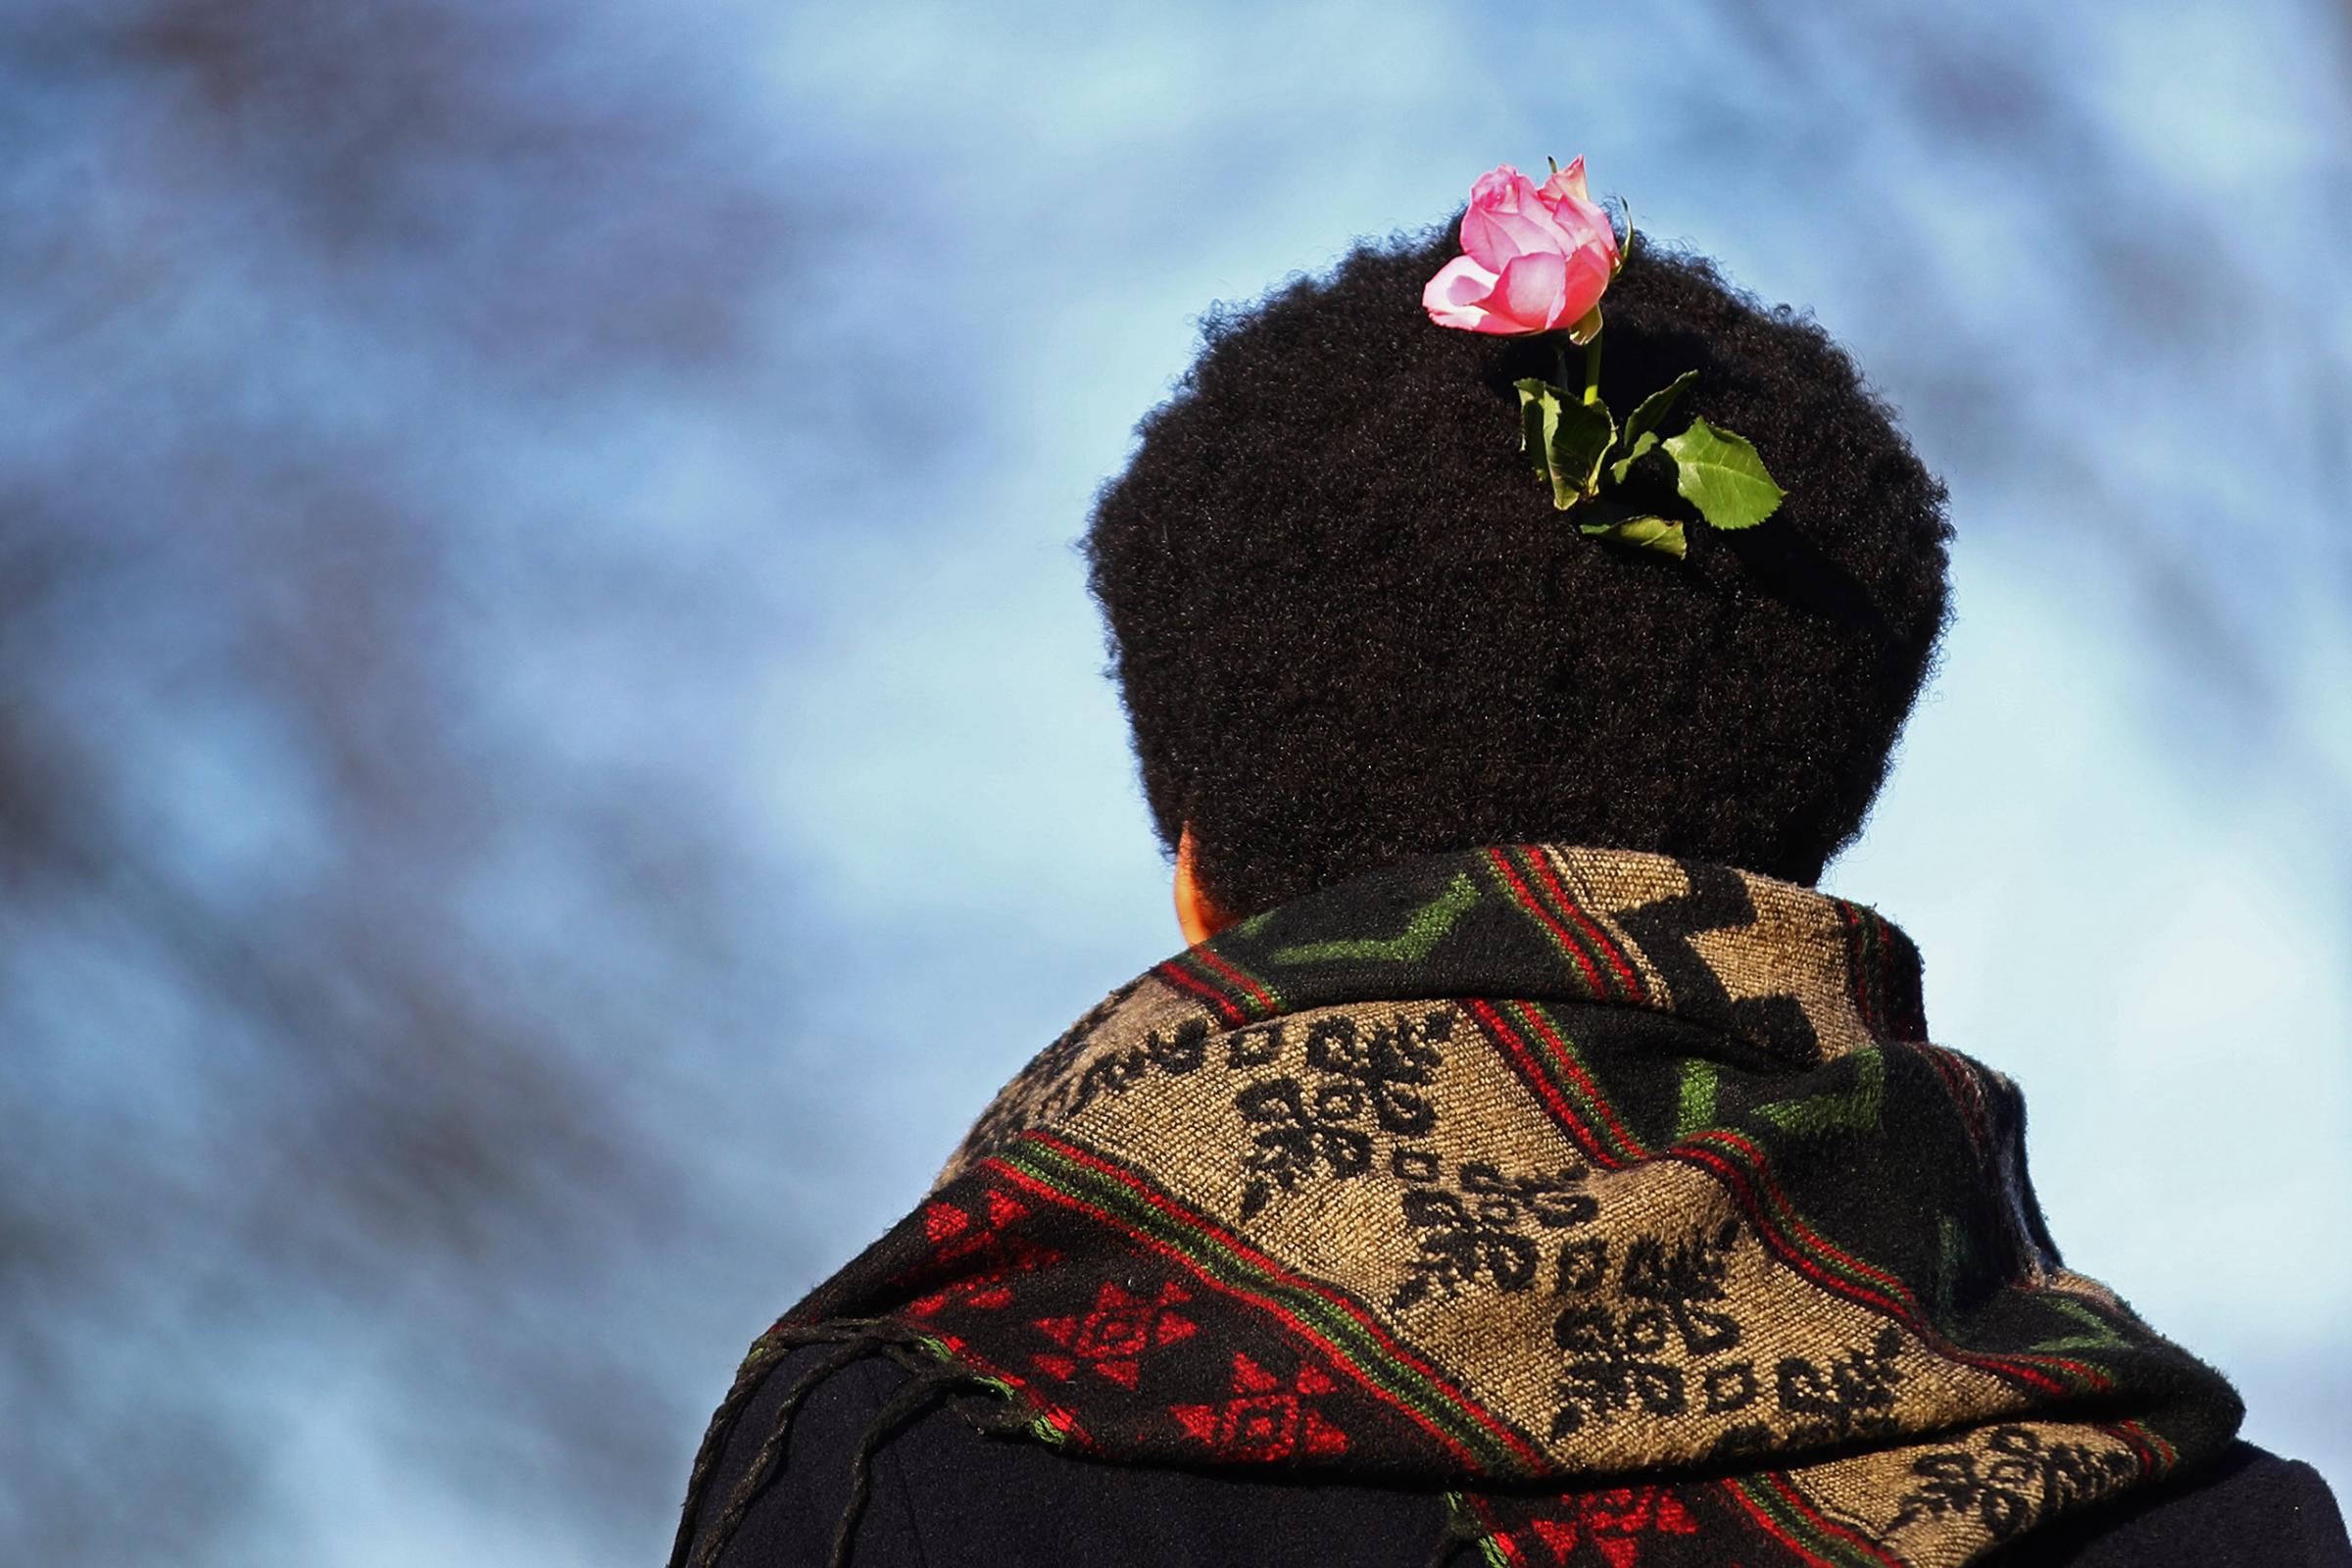 A demonstrator with a pink flower in his hair joins the crowd as they make their way towards the US Consulate during the Women's March held at Museumplein on January 21, 2017 in Amsterdam, Netherlands.